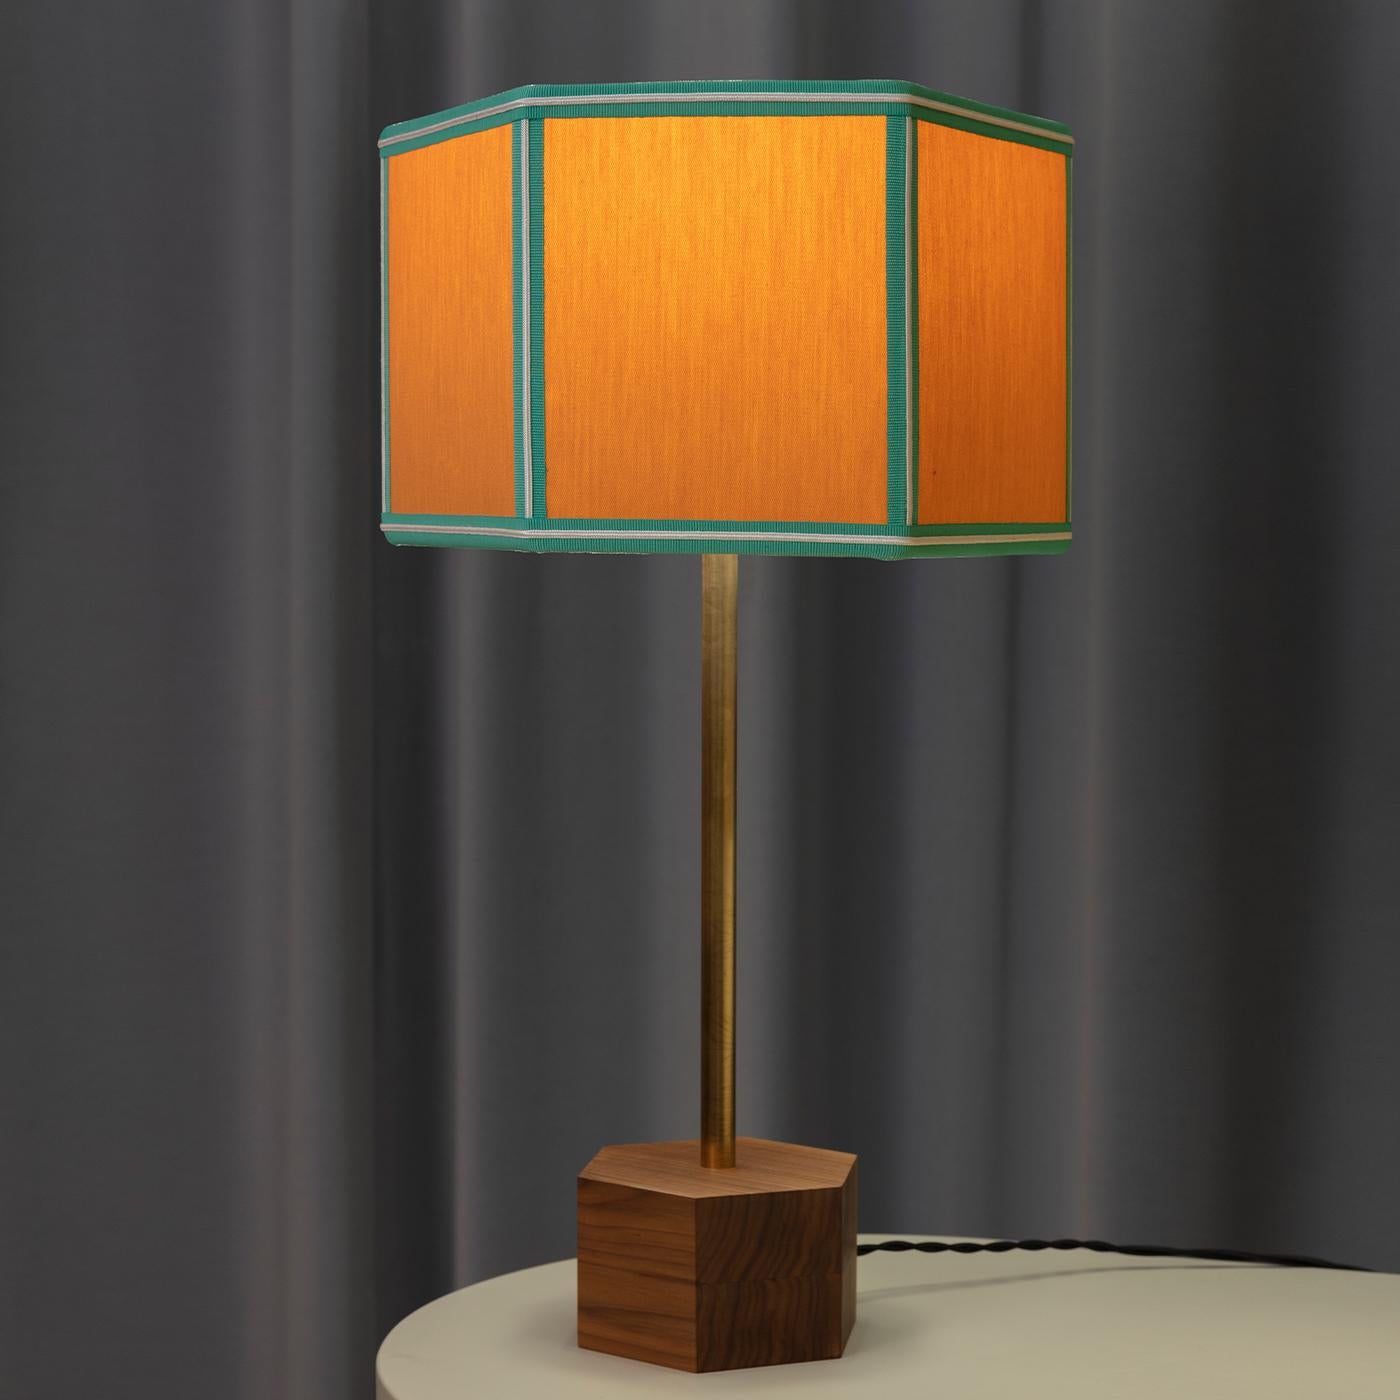 The Easy Floor Lamp is all about simple classic geometry, masterfully revisited through various color combinations. The lampshade cotton fabric is presented in block colors with contrasted trimmings and fringing around the bottom rim. The hexagonal